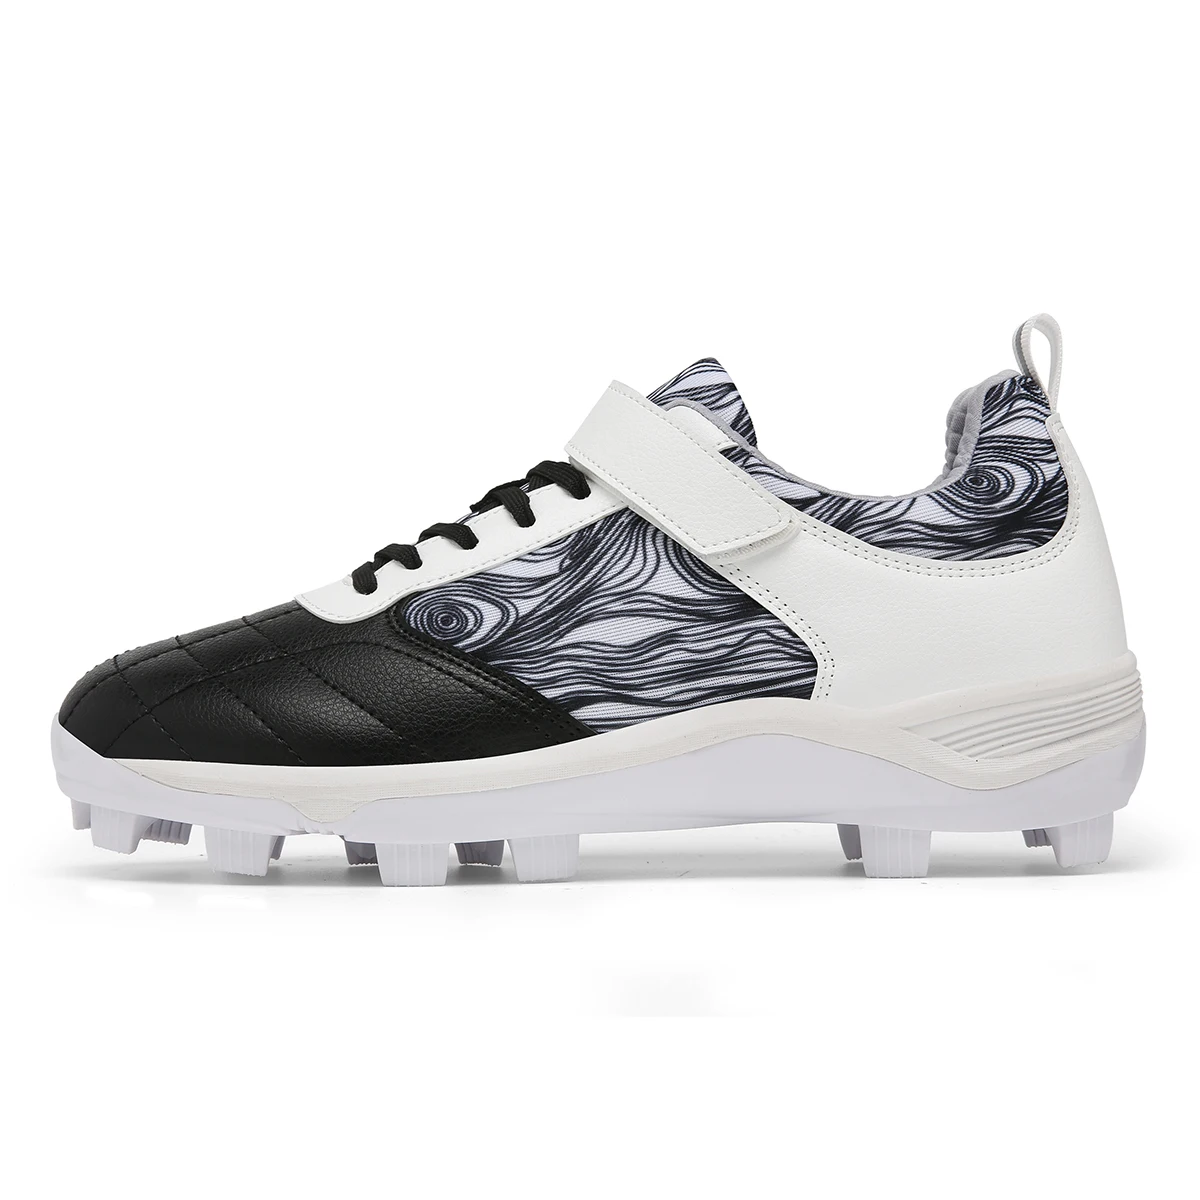 Men's Baseball Shoes Long Spikes Softball Shoes Non-slip Cleats And Turf Softball Sneakers Beginners Baseball training sneakers